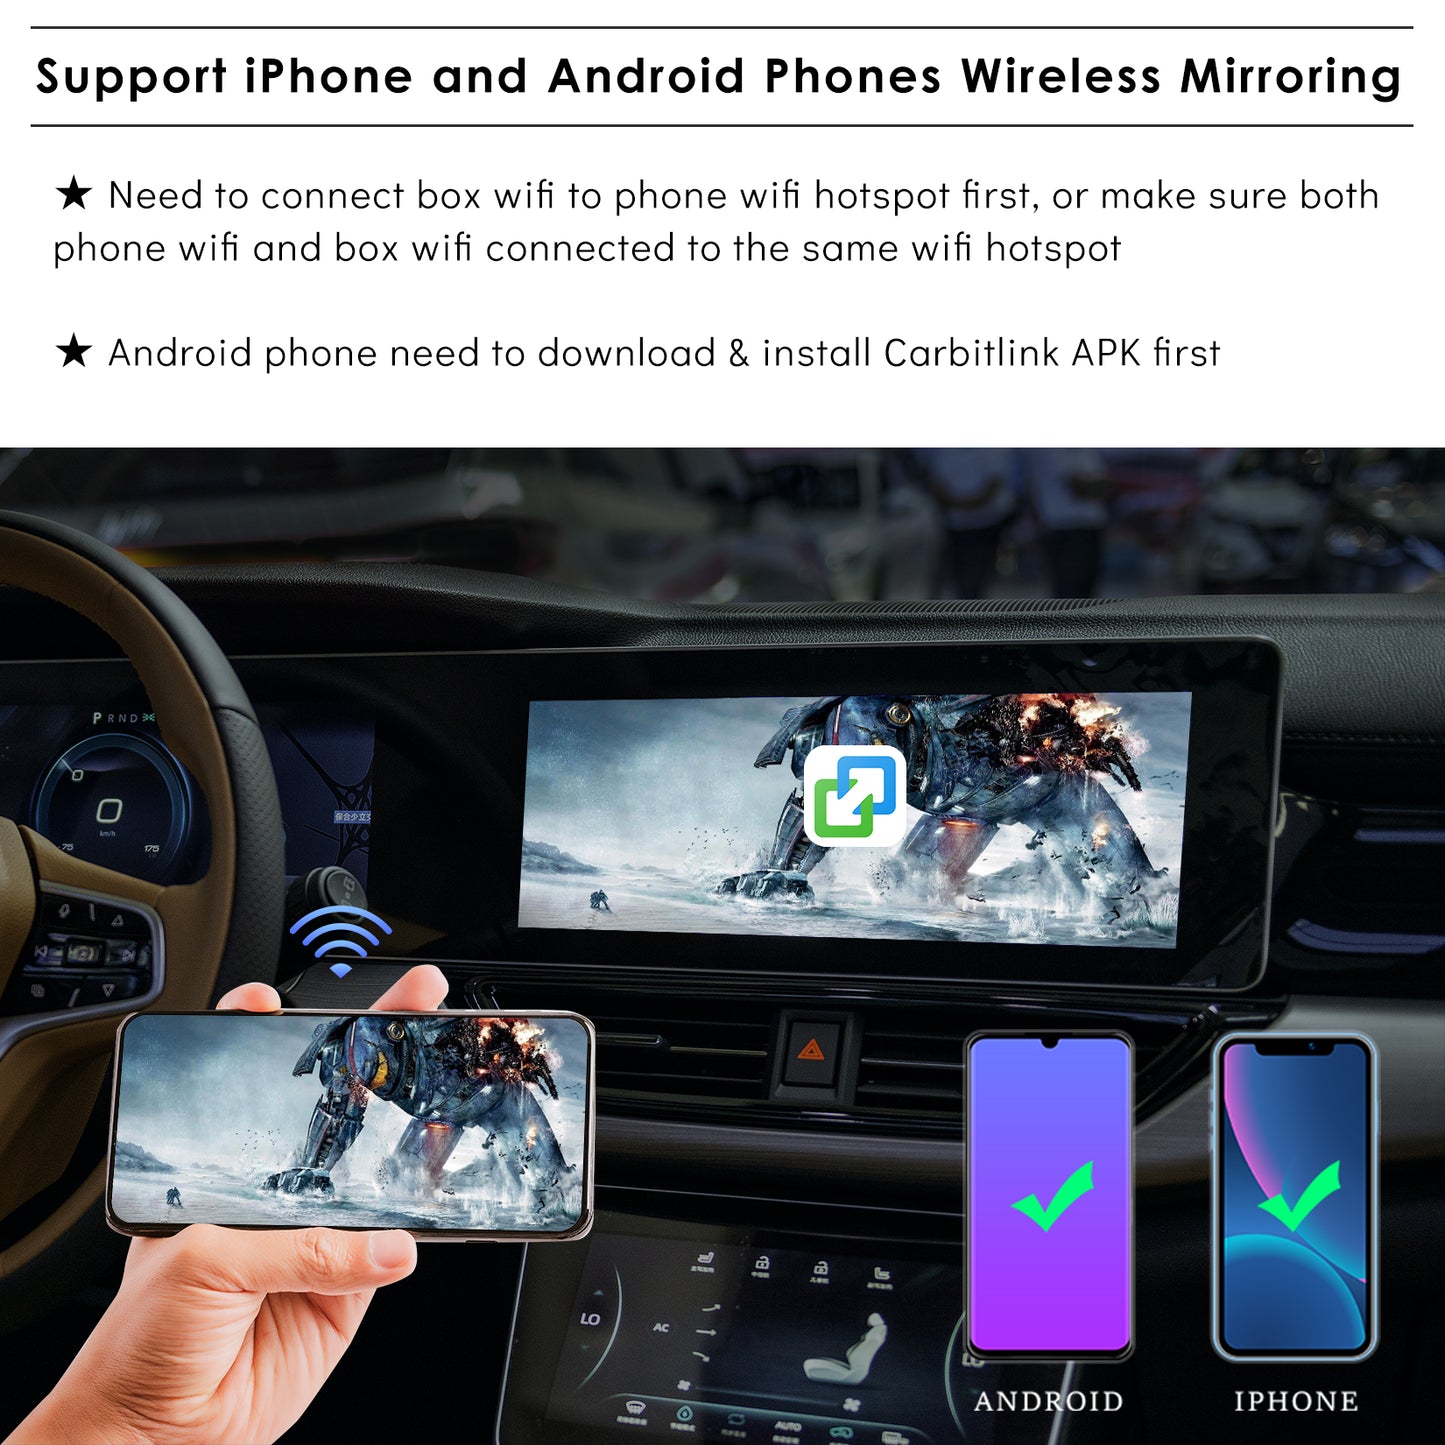 CarProKit Wireless CarPlay Android Auto Mirroring Adapter Android 11.0 YouTube Netflix Video AI Box for 2016-2024 Cars with Factory Wired CarPlay